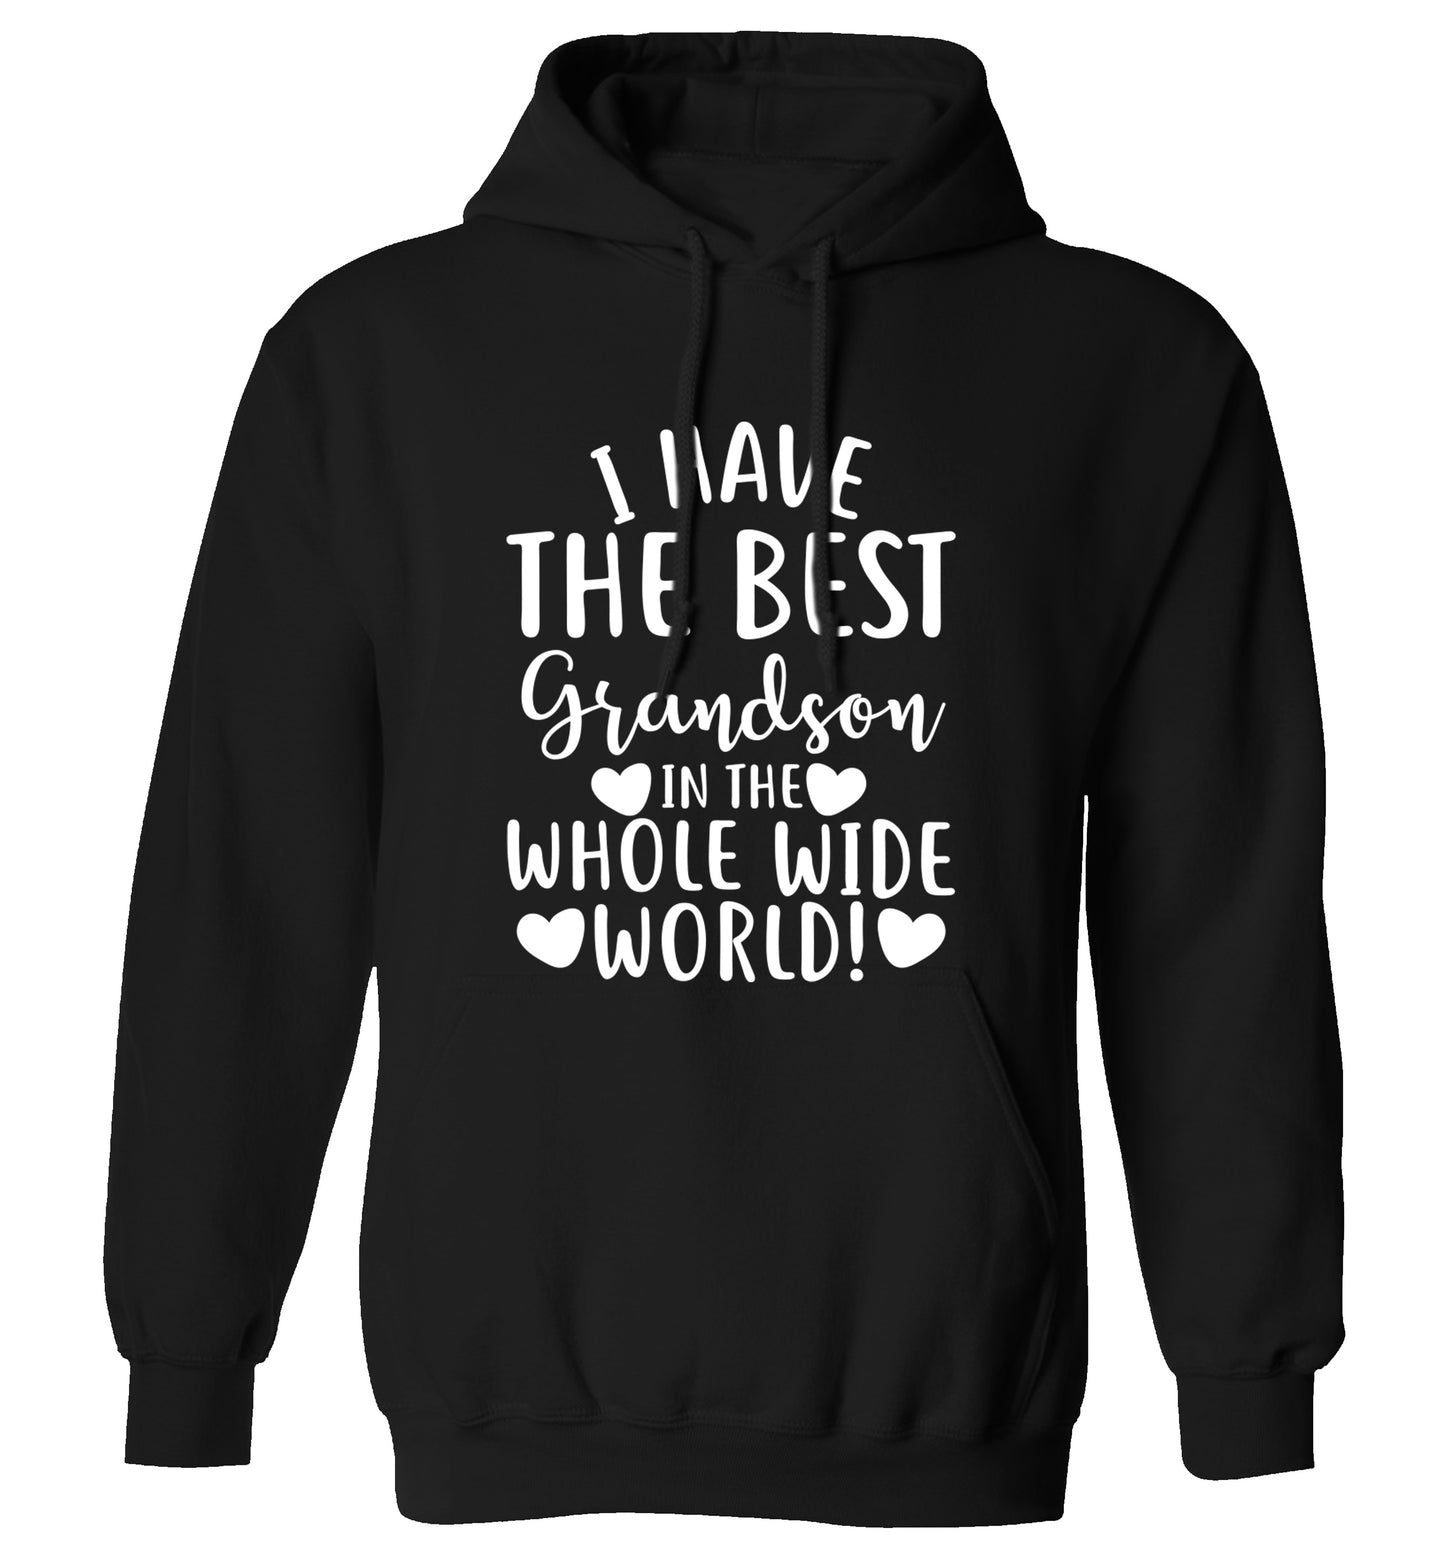 I have the best grandson in the whole wide world! adults unisex black hoodie 2XL